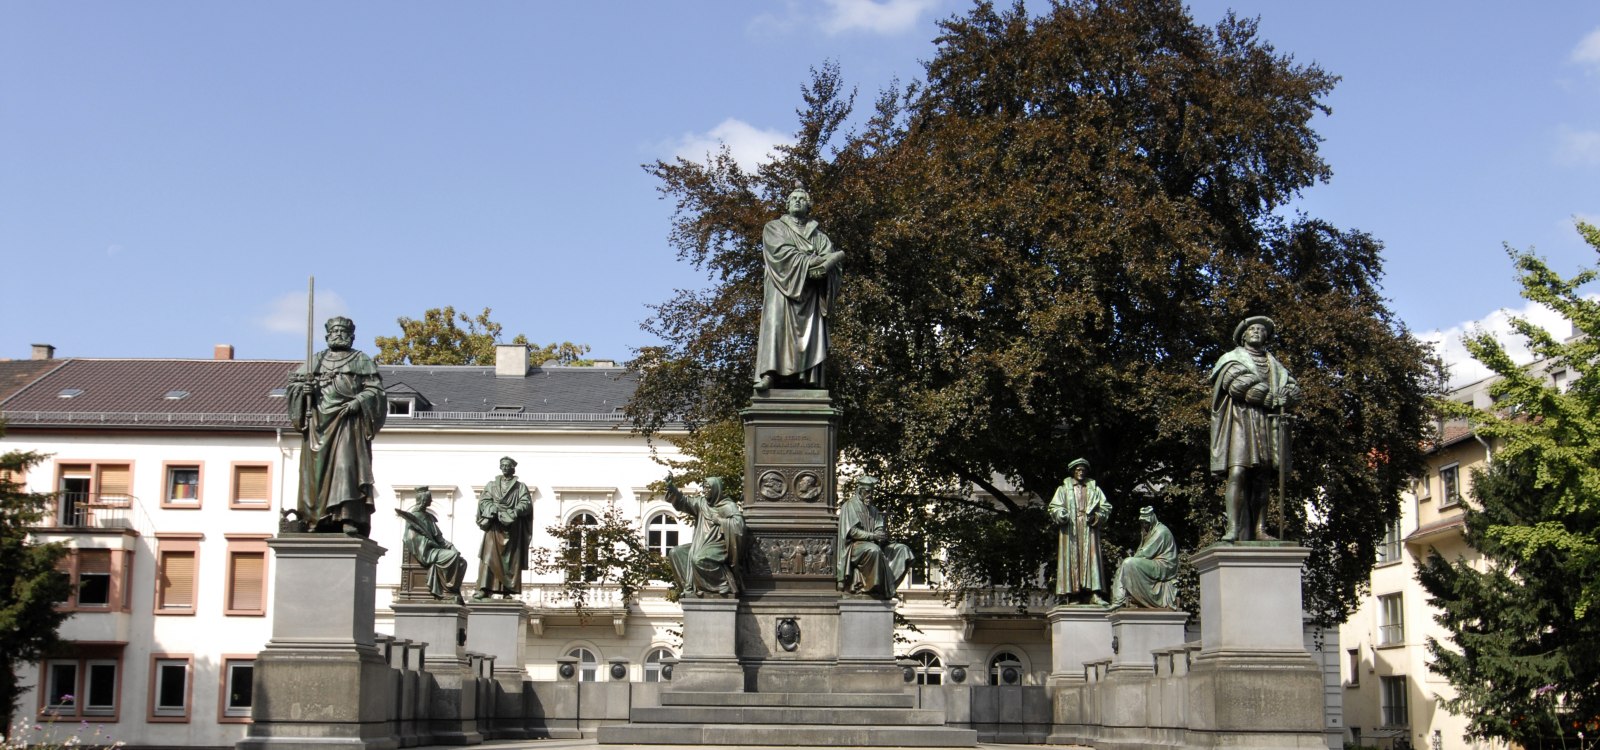 The picture depicts the Luther Monument in Worms. The sculpture represents the reformer Martin Luther, who spoke his famous words before the Imperial Diet in Worms in 1521: &quot;Here I stand, I can do no other. God help me. Amen.&quot; The monument is an impressive testament to historical events and a significant site in Worms.